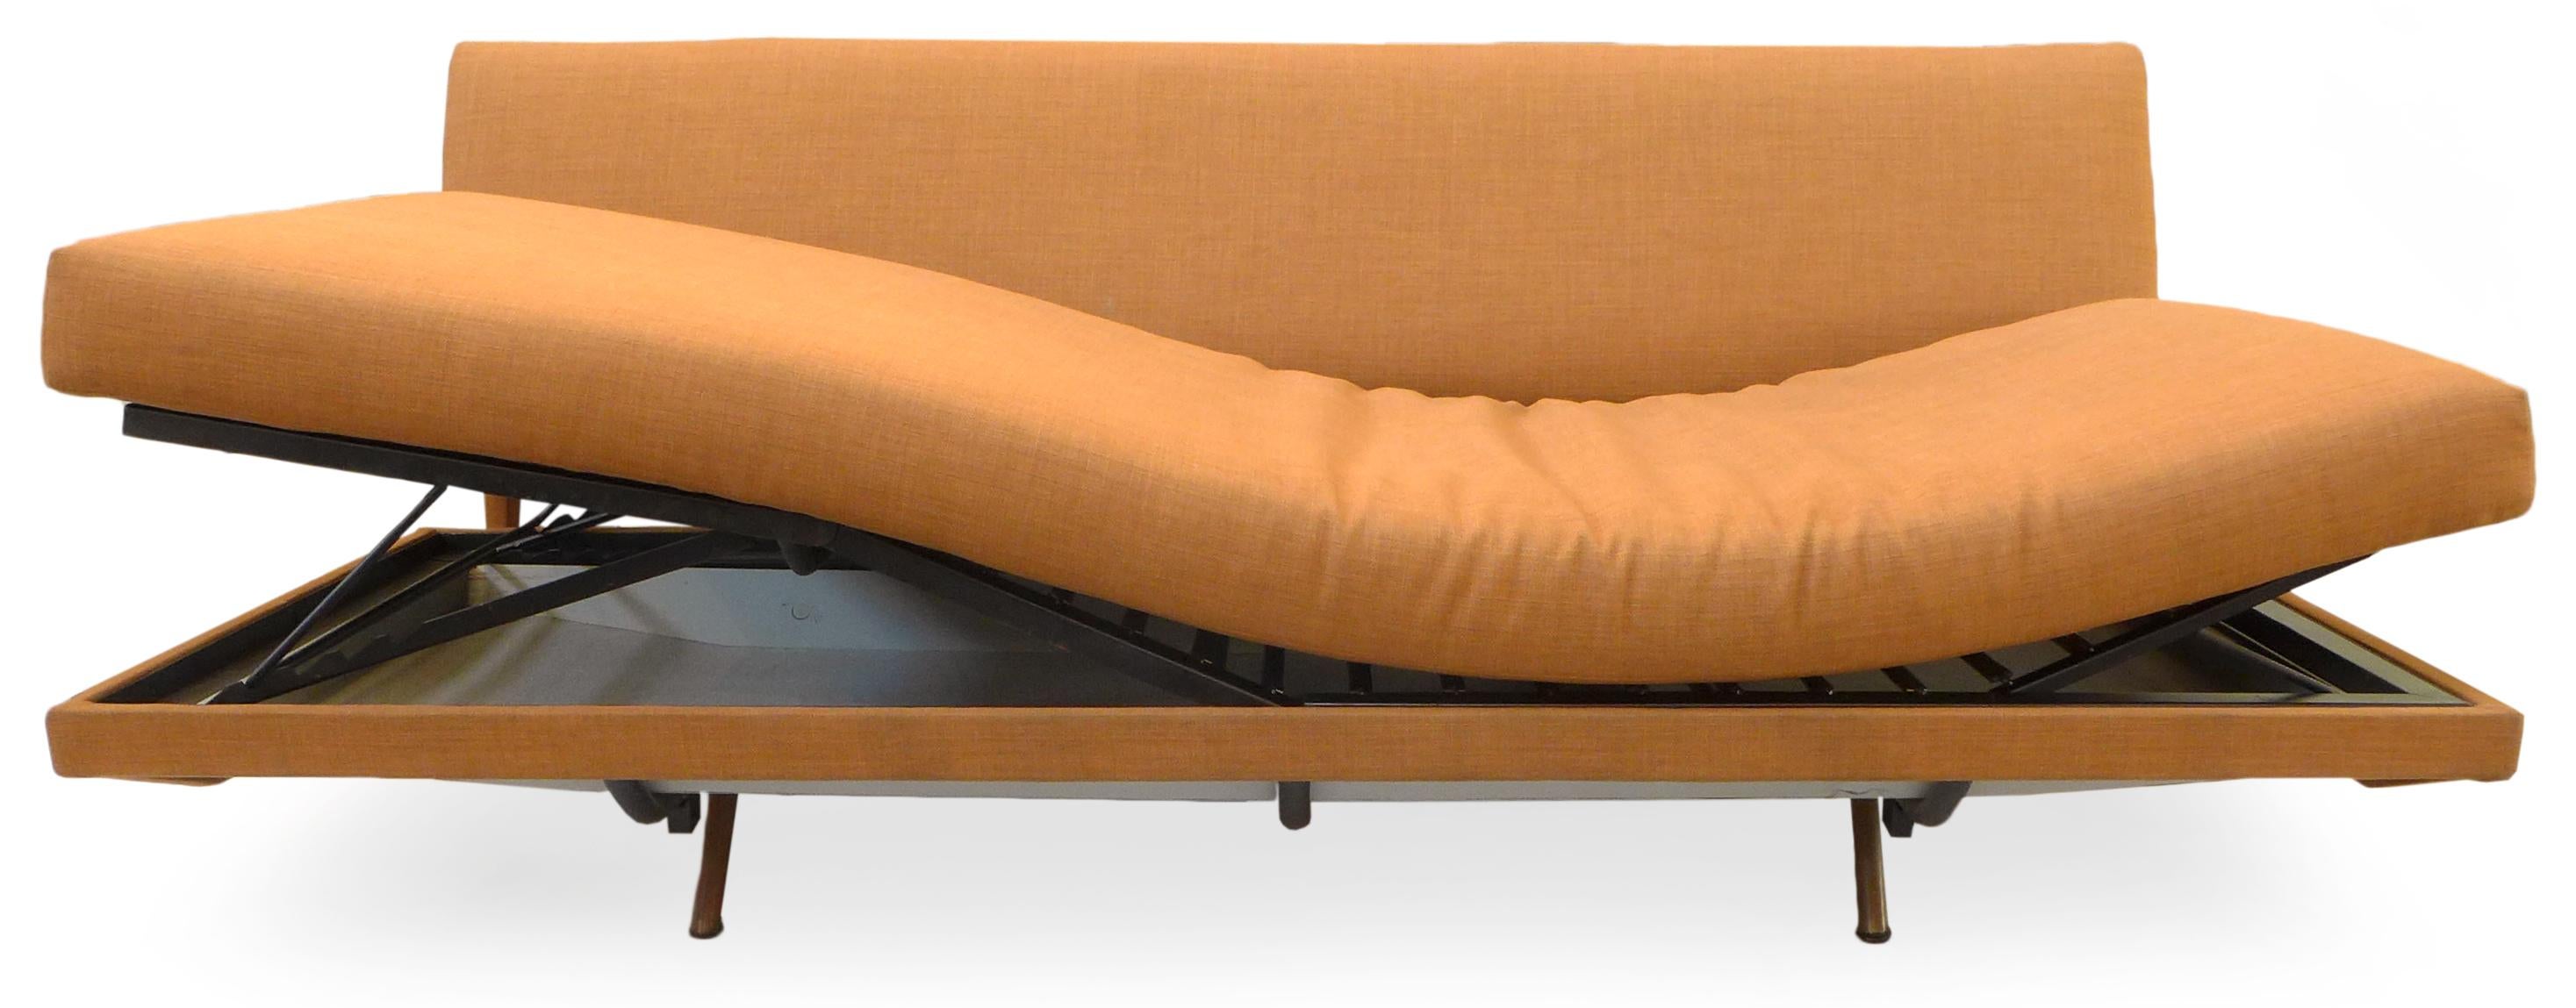 Italian Mid-Century Modern Sofa, Daybed, Lounge by Marco Zanuso for Airflex For Sale